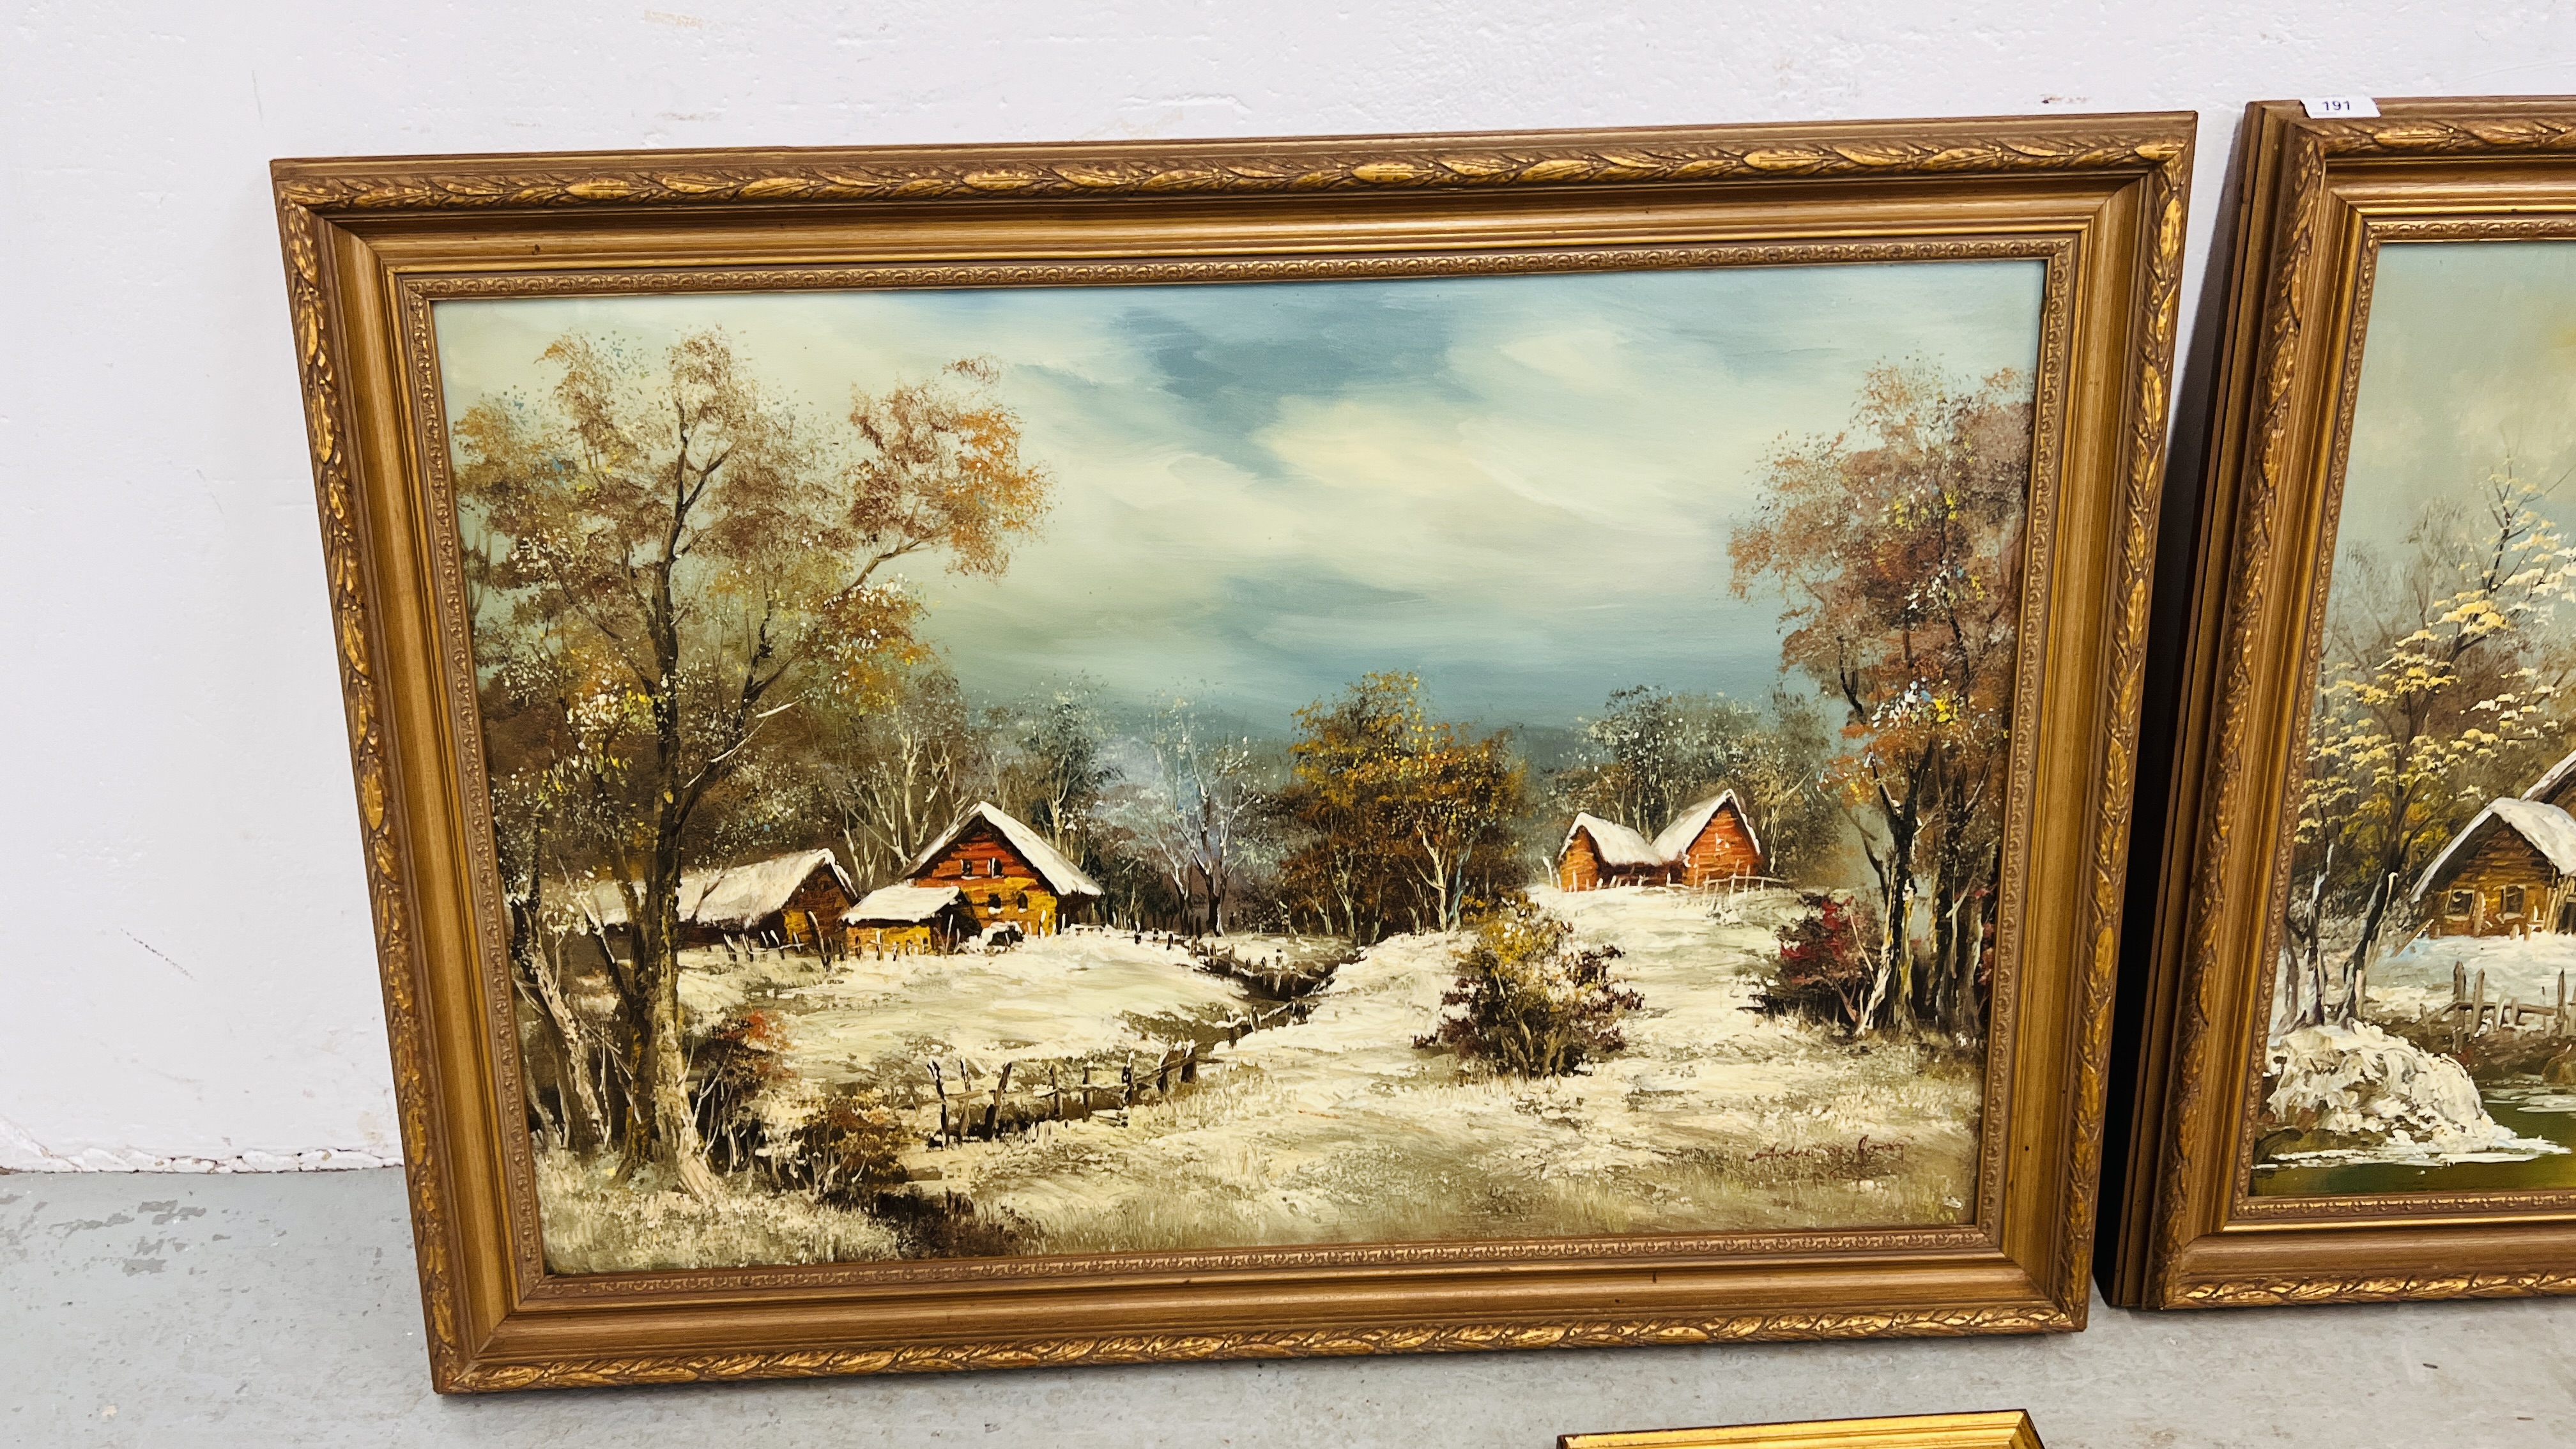 A PAIR OF GILT FRAMED OIL ON CANVAS PICTURES DEPICTING COTTAGES IN A SNOWY LANDSCAPE W 105. - Image 9 of 9